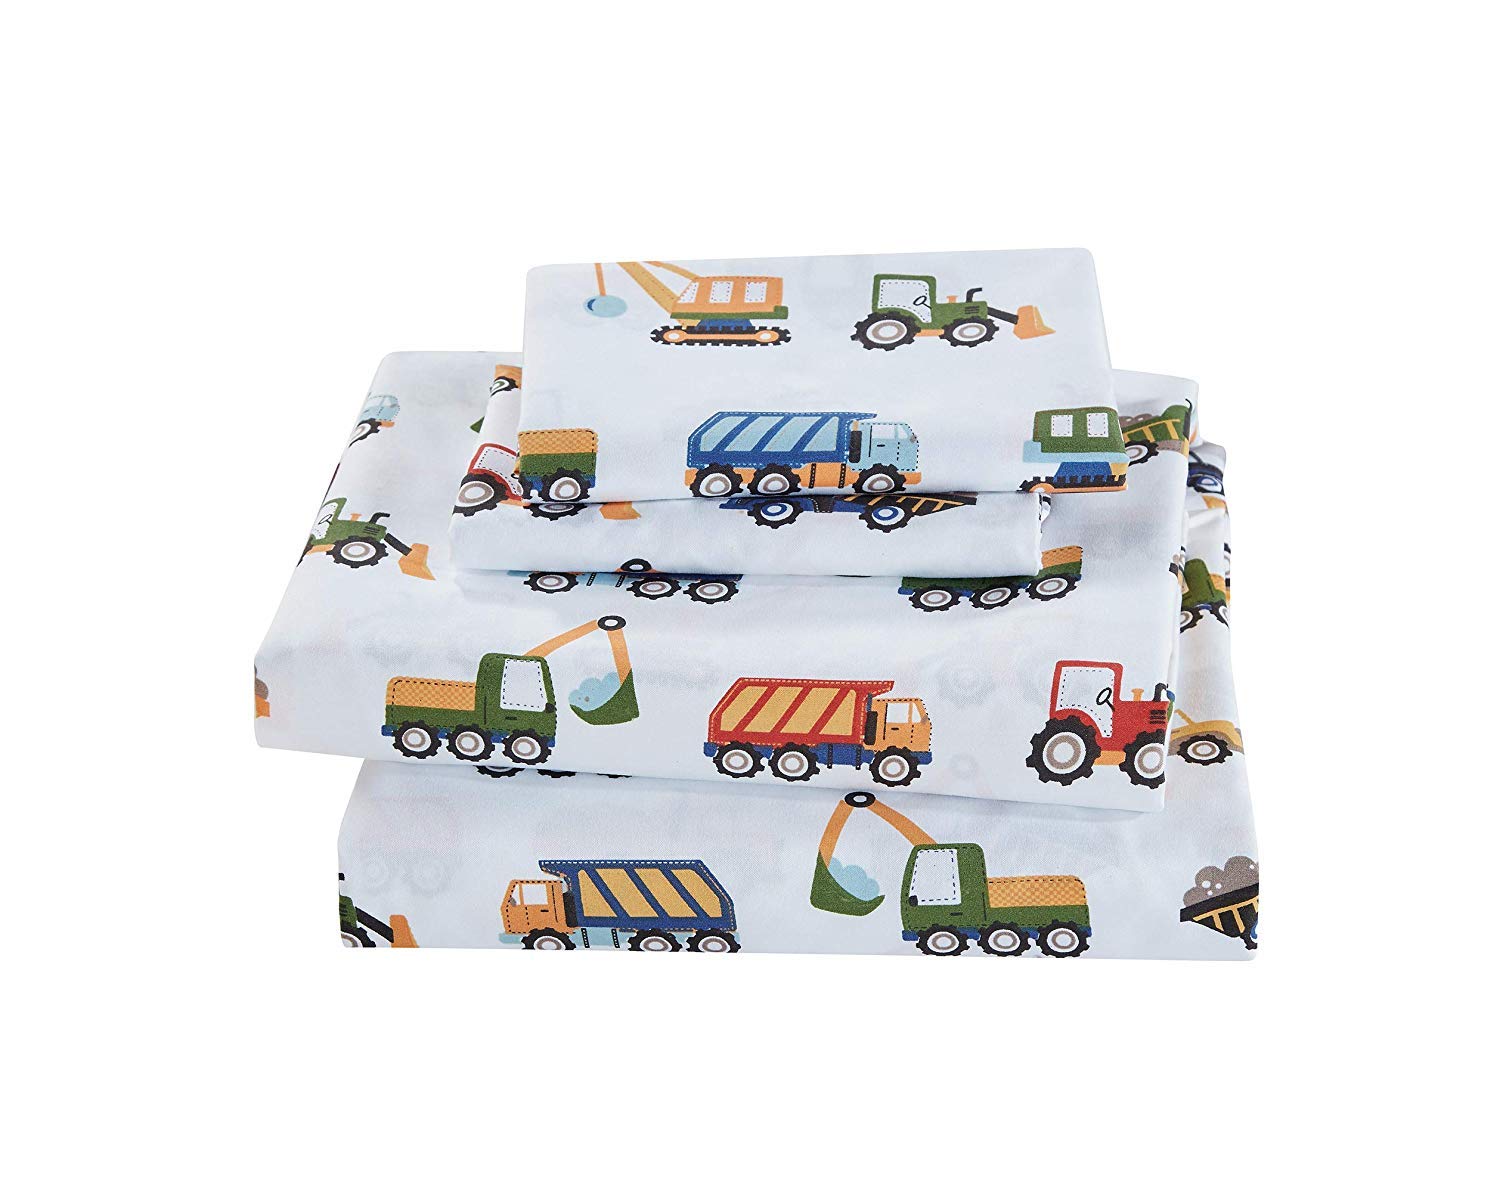 Book Cover Elegant Homes Construction Site Equipment Trucks Tractors Cranes Excavators Design 3 Piece Printed Sheet Set with Pillowcases Flat Fitted Sheet for Boys/Kids # Construction Trucks (Twin Size) Twin White